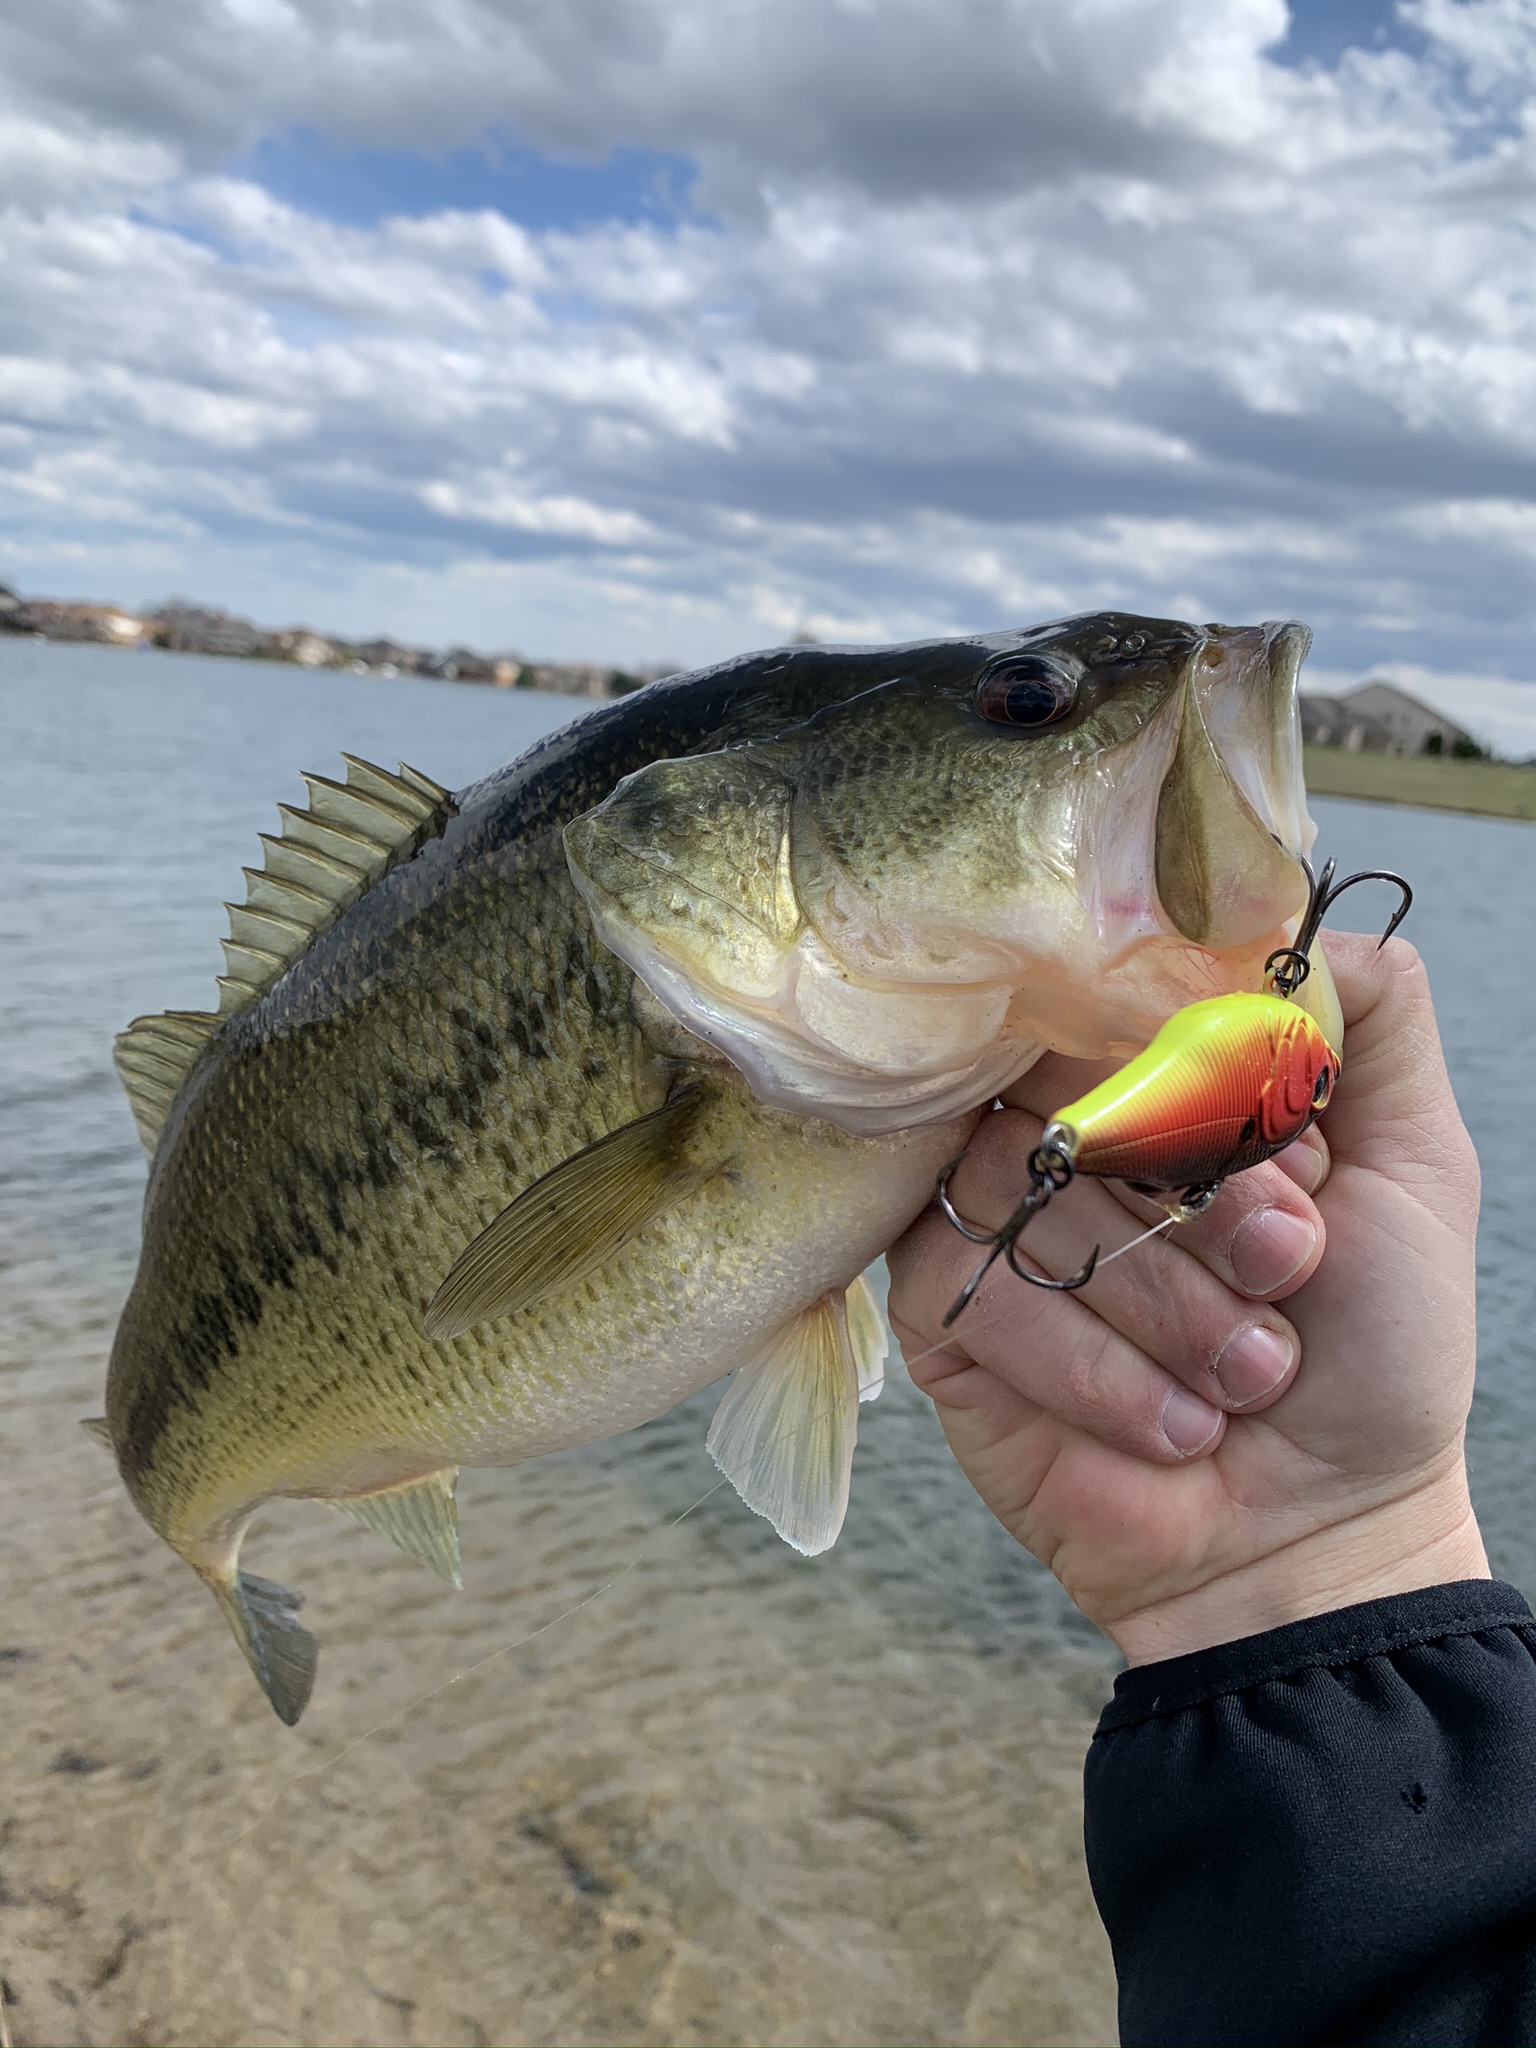 6th sense trace becoming one of my favorite lures : r/bassfishing